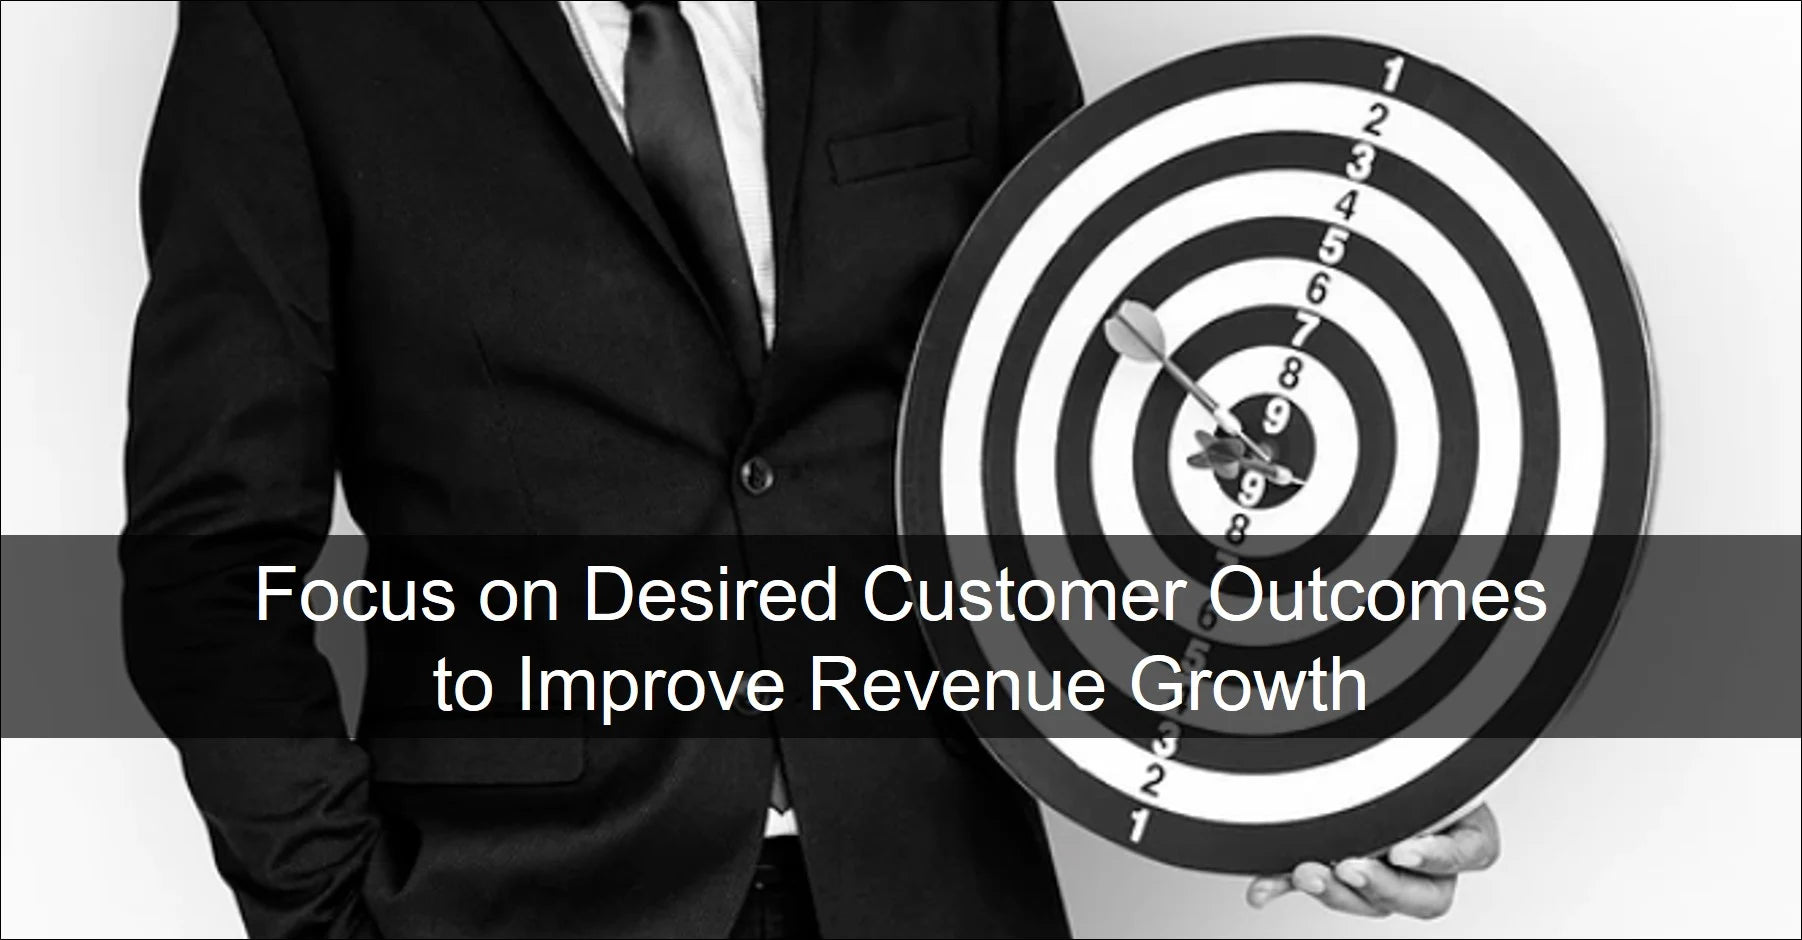 Focus on Desired Customer Outcomes to Improve Revenue Growth